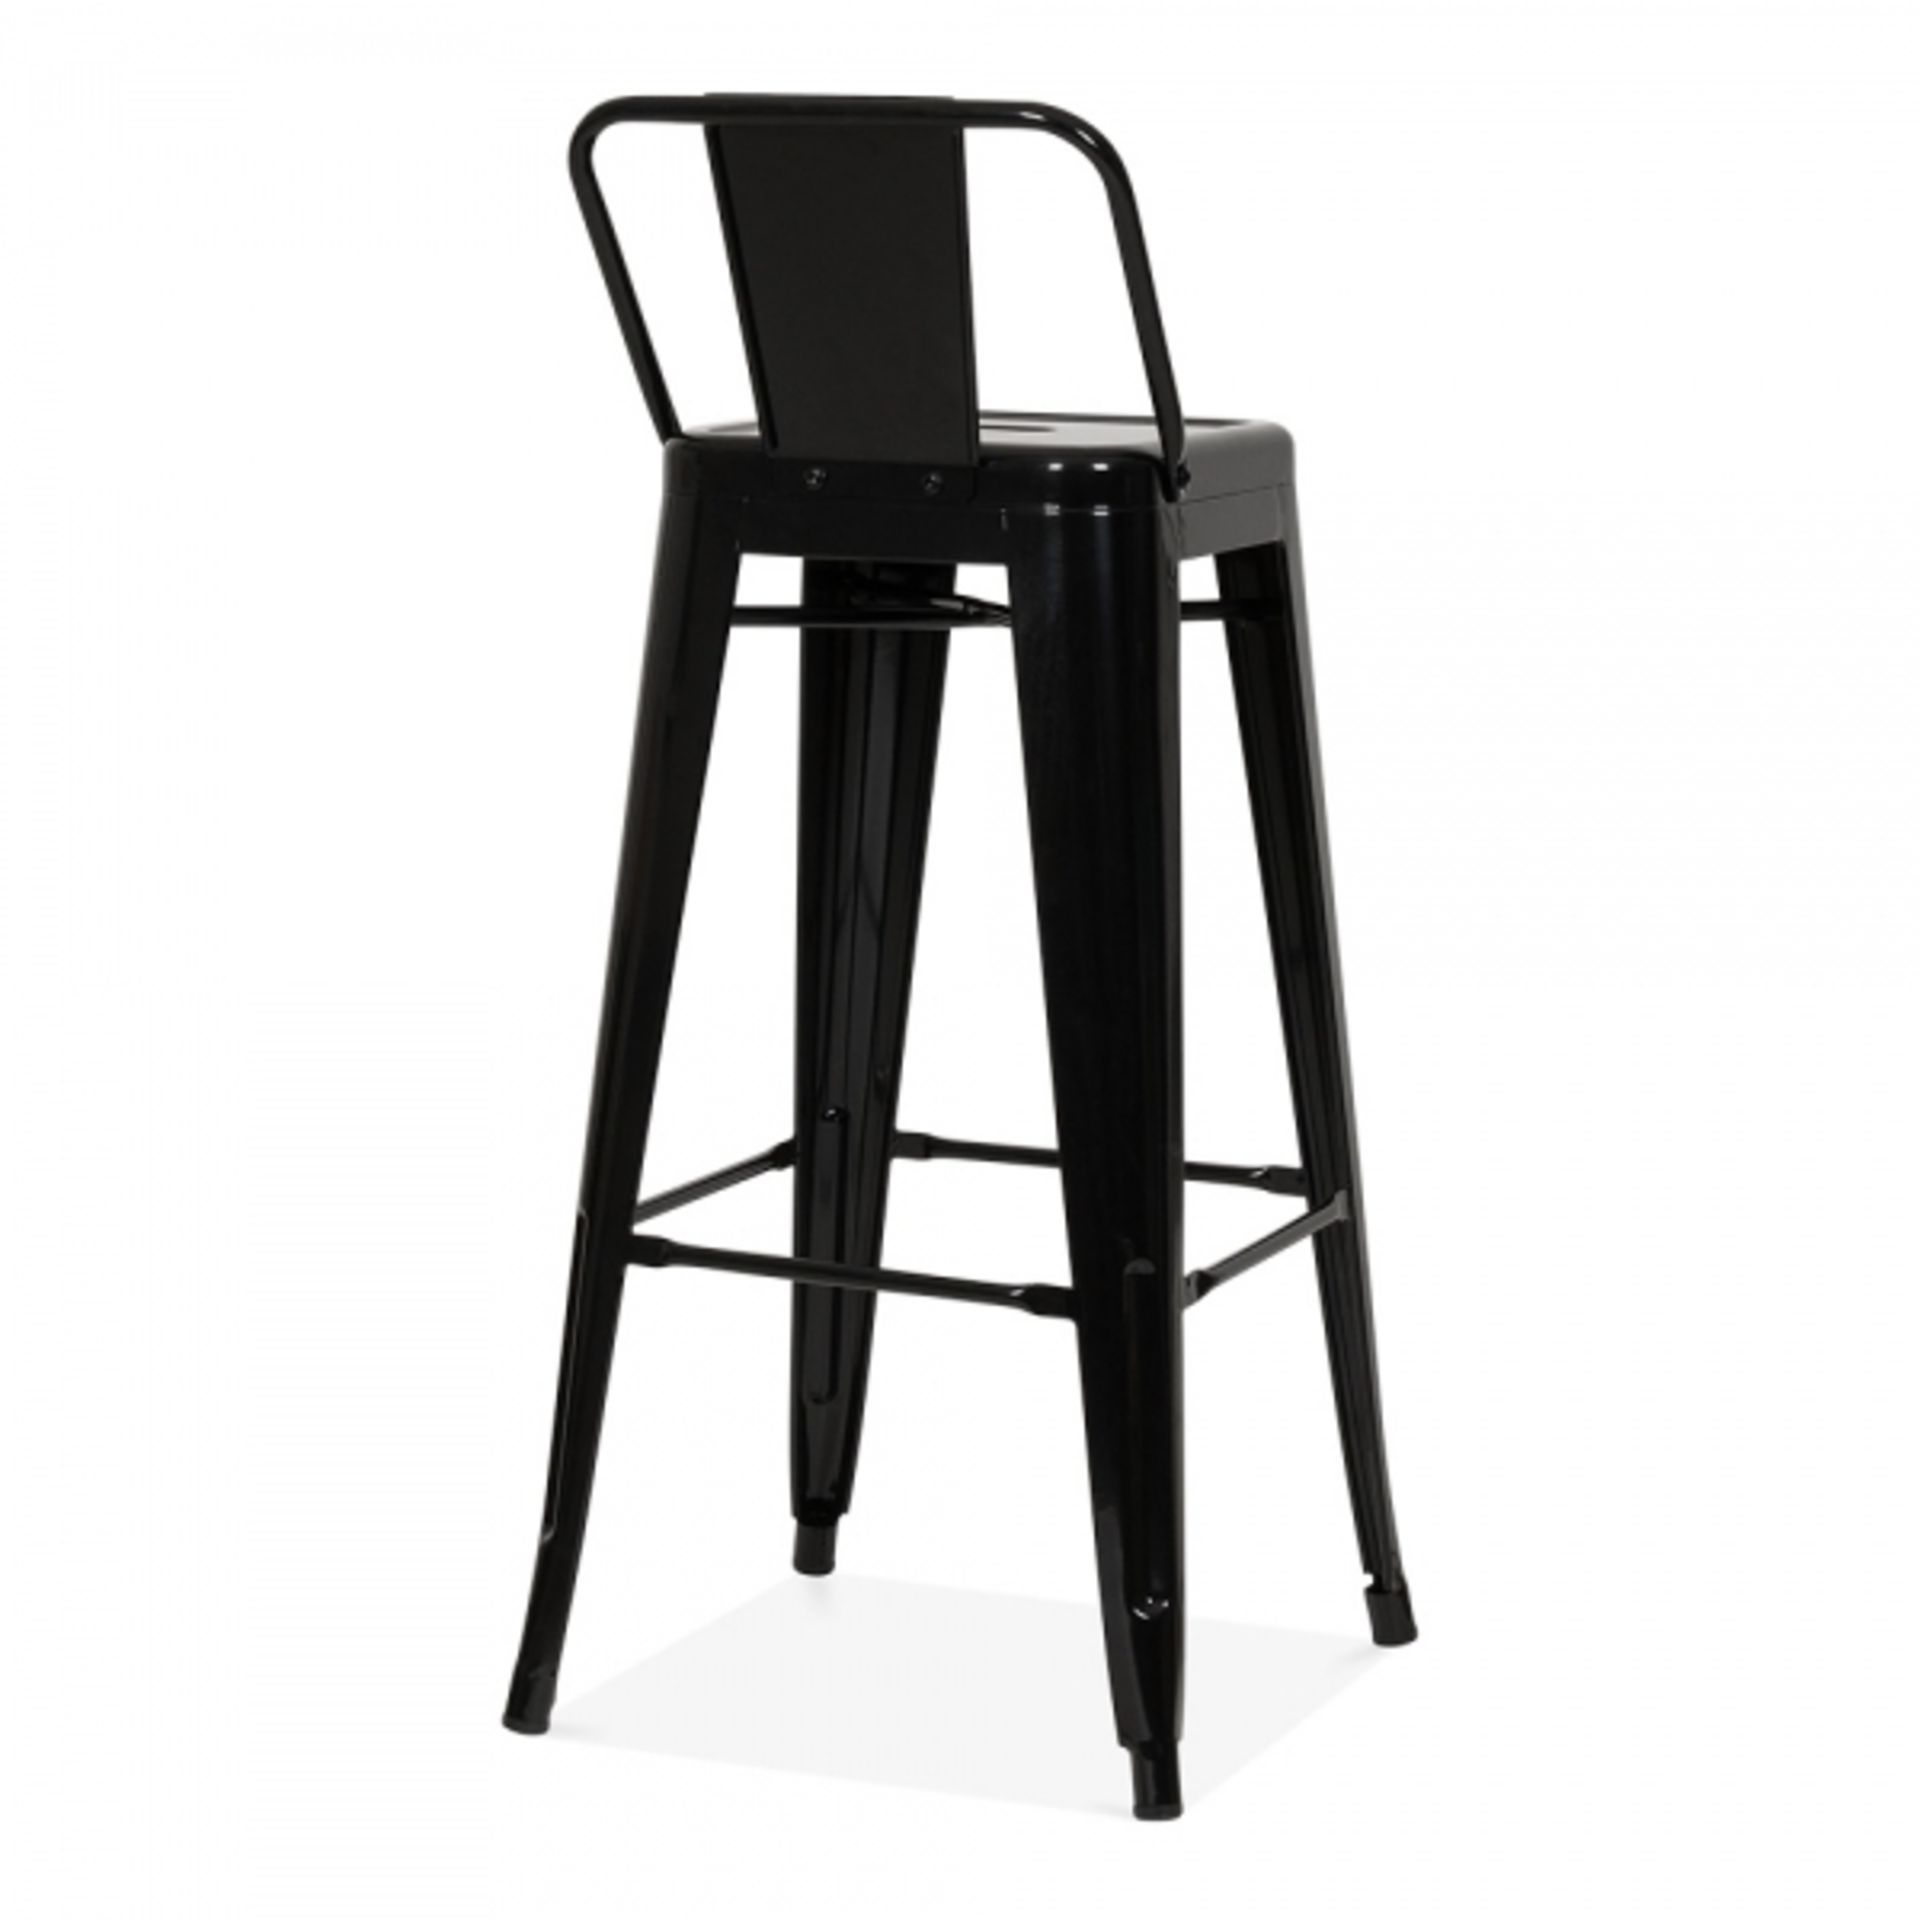 1 x Tolix Industrial Style Outdoor Bar Table and Bar Stool Set in Black - Includes 1 x Bar Table and - Image 3 of 9